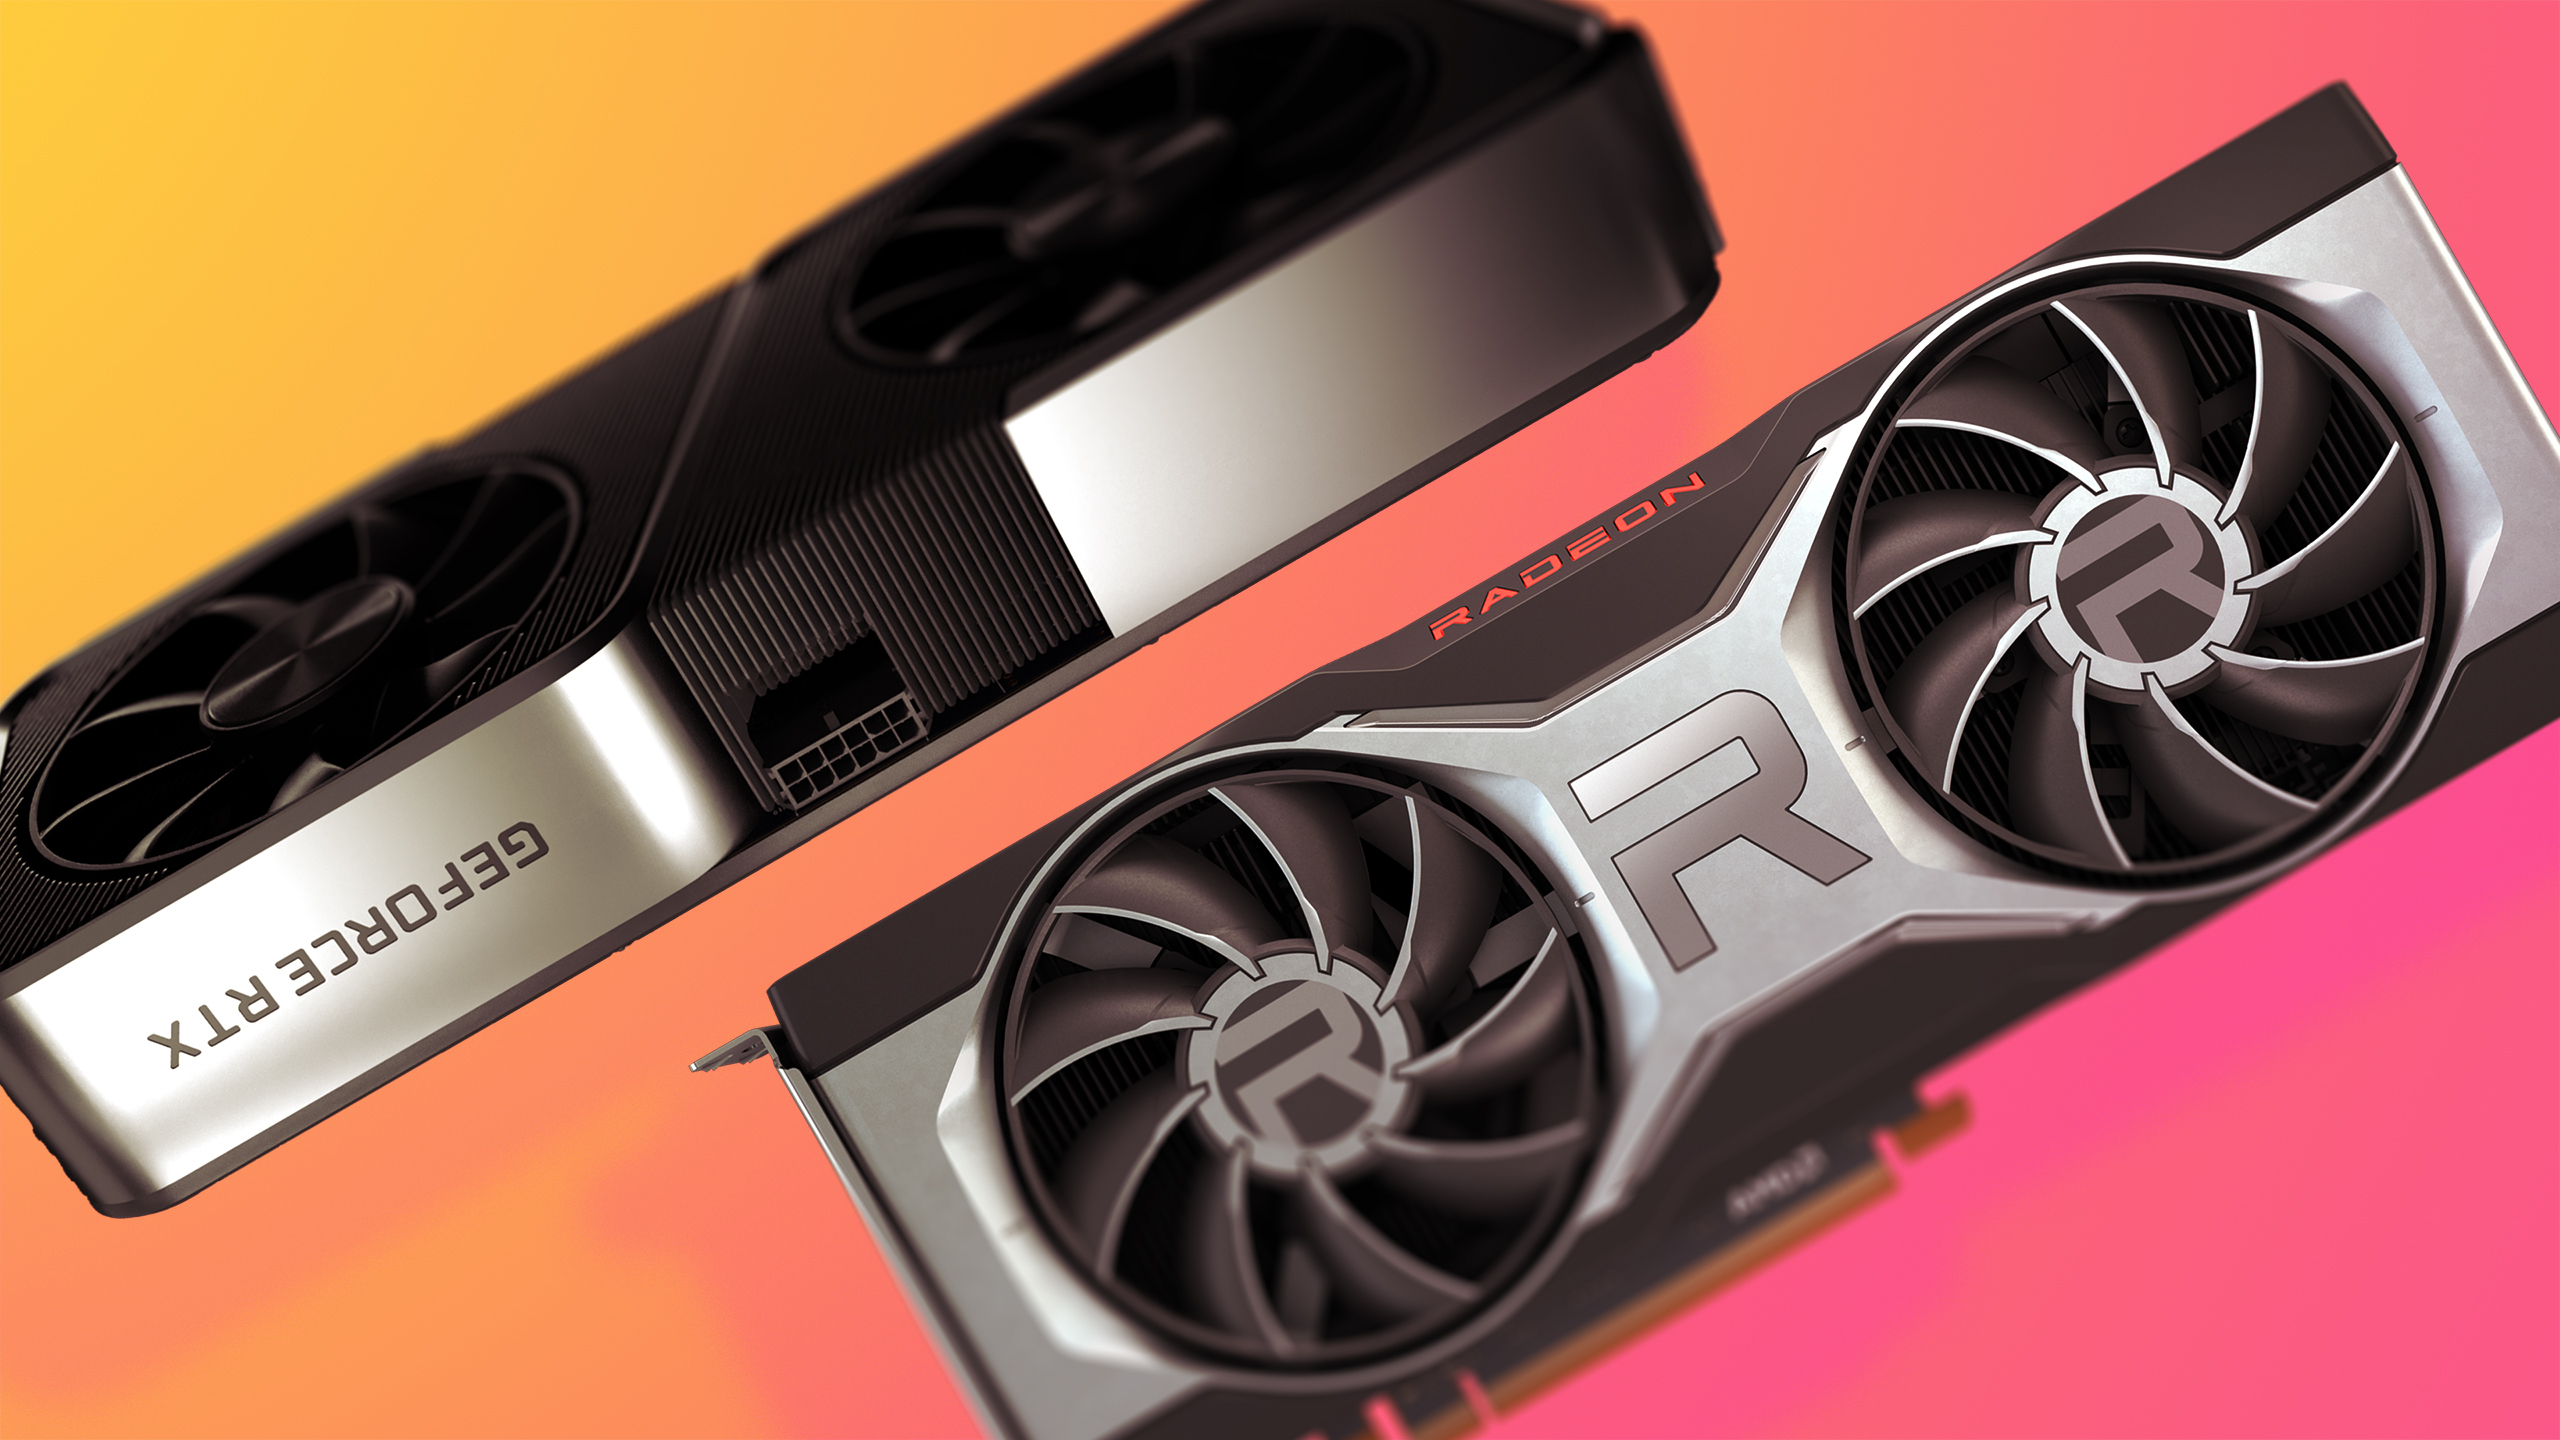 The Nvidia RTX 3070 and AMD RX 6700 XT side by side on a colorful background